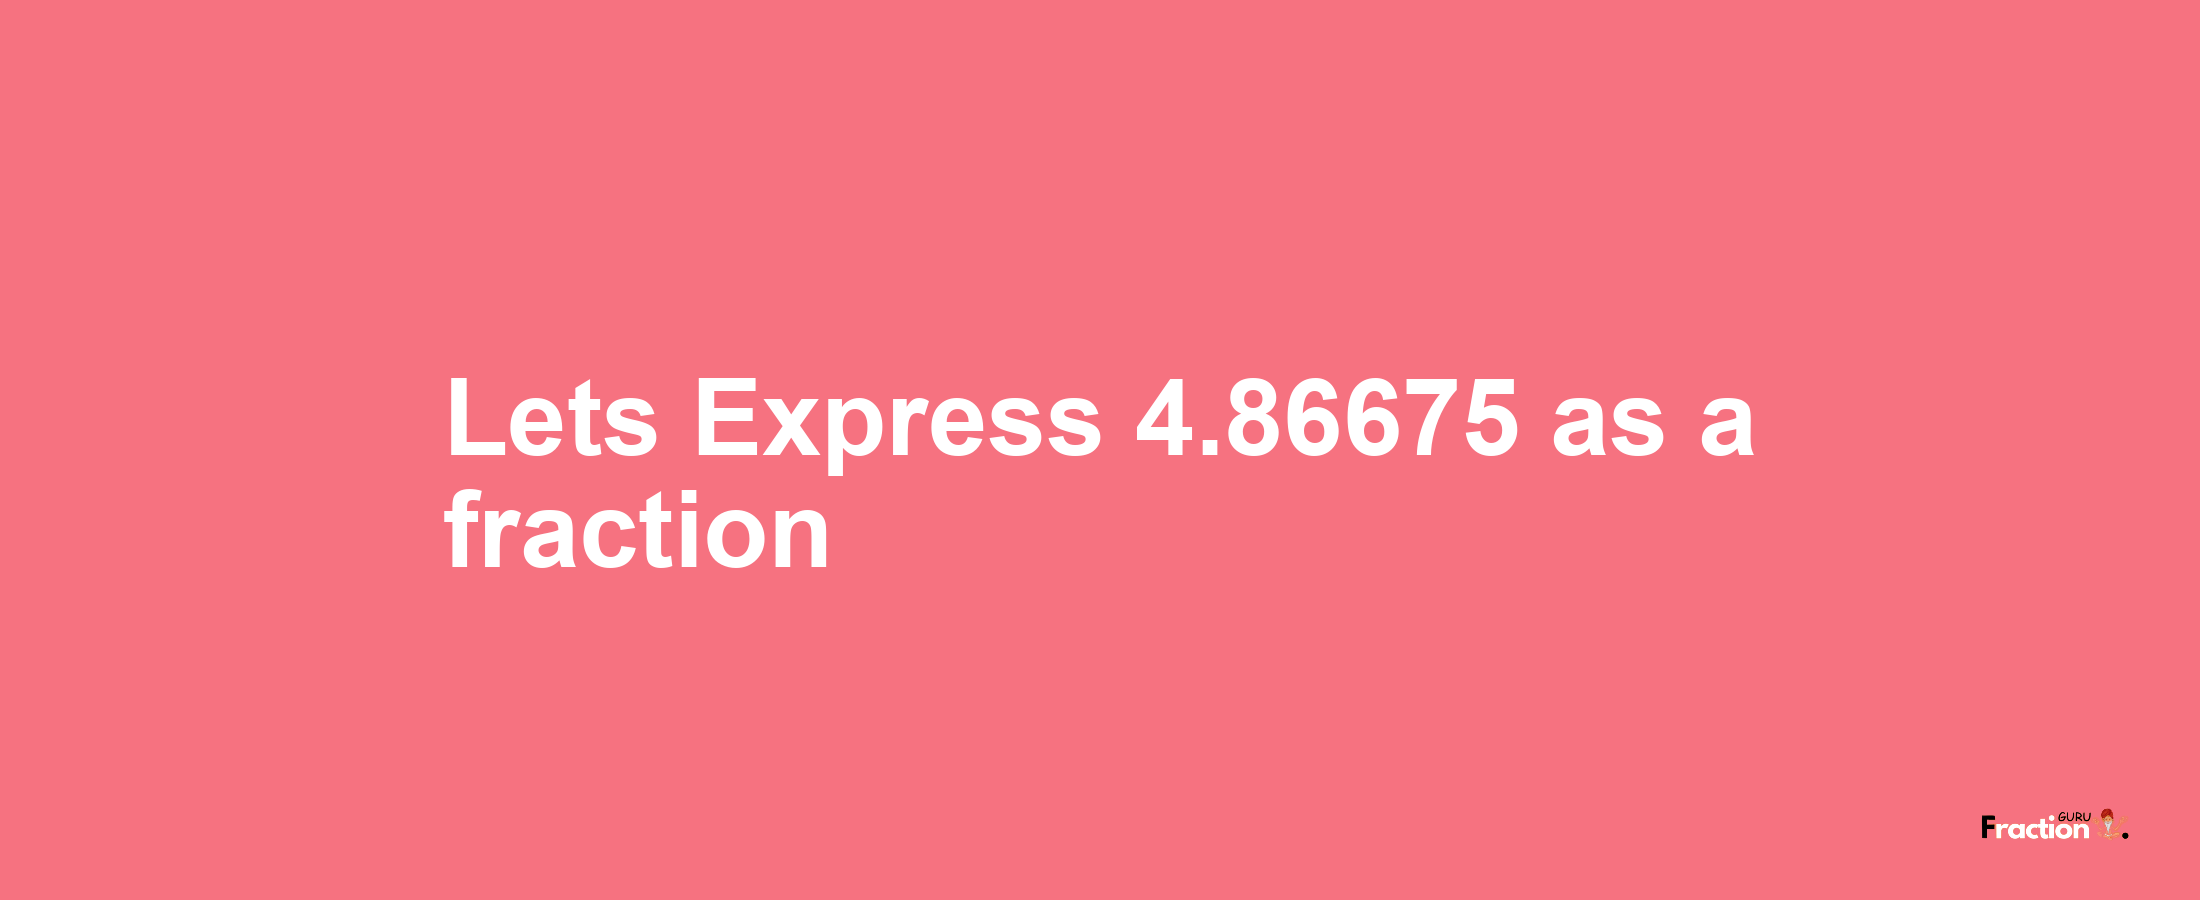 Lets Express 4.86675 as afraction